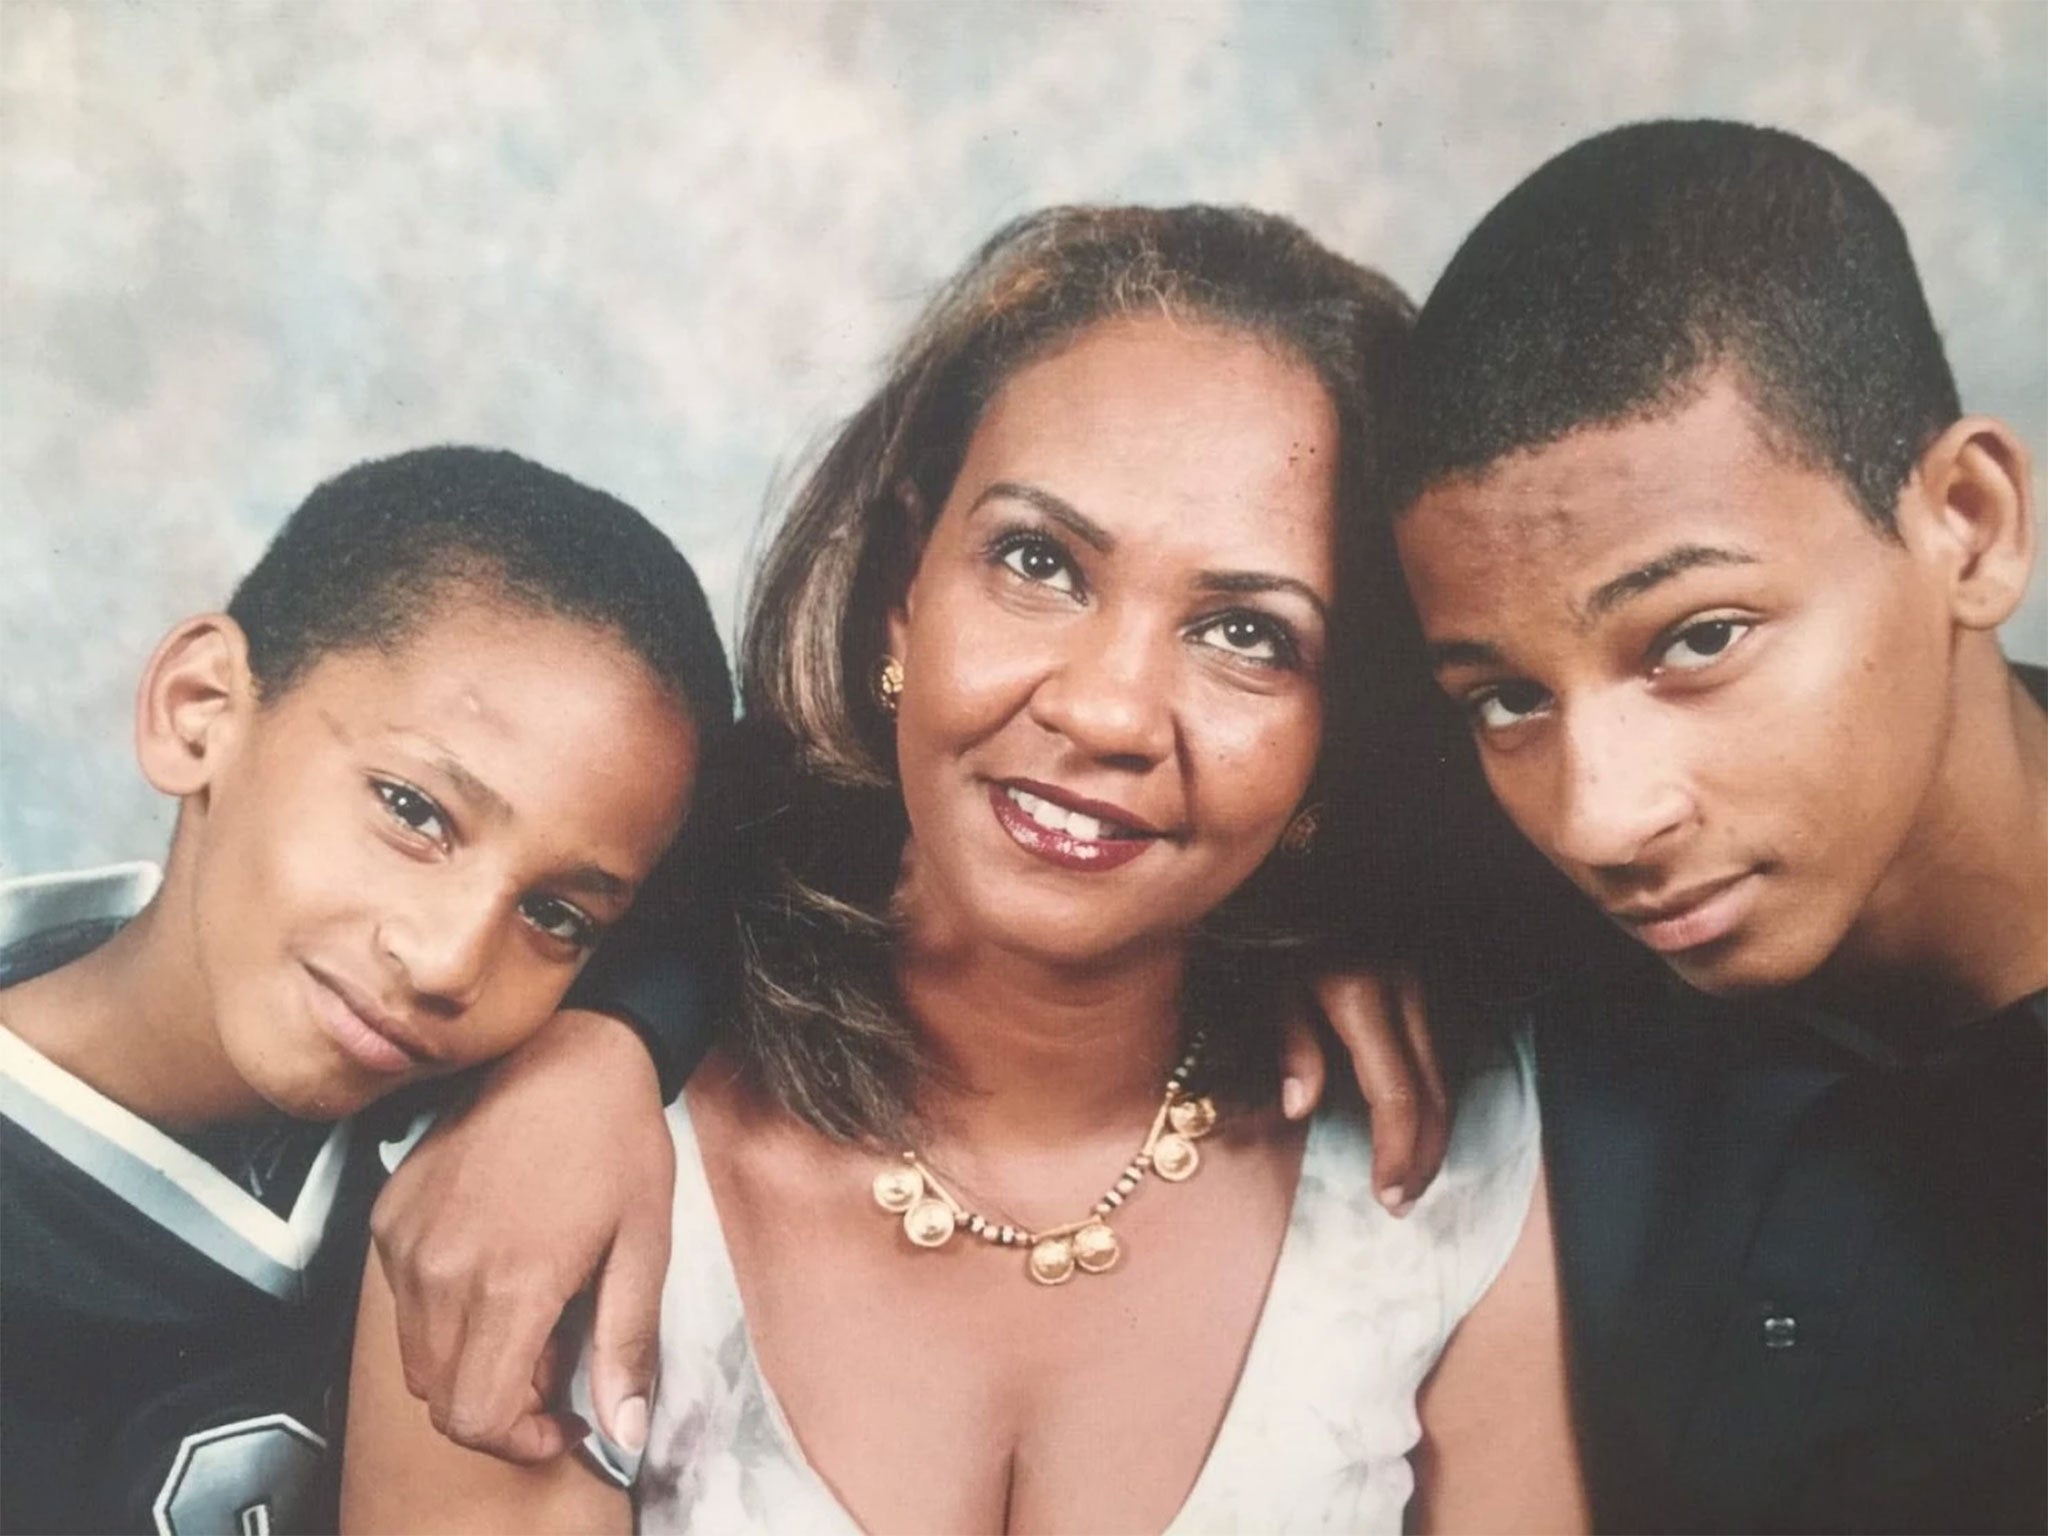 Then-15-year-old El Shafee Elsheikh, right, seen with his mother and younger brother Mahmoud, who was reportedly killed ater also travelling to Syria